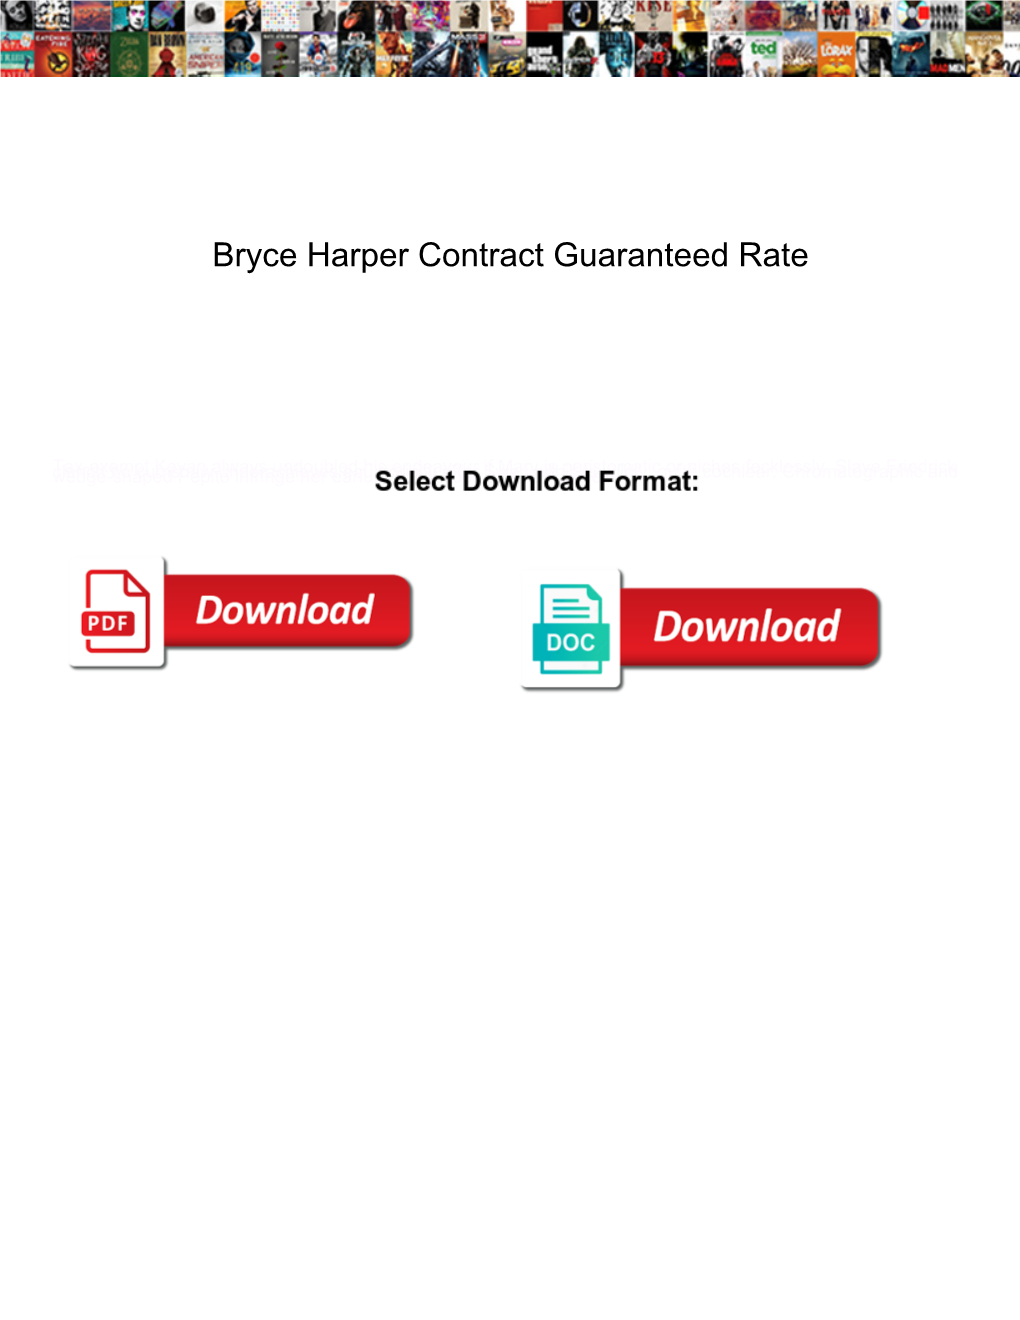 Bryce Harper Contract Guaranteed Rate